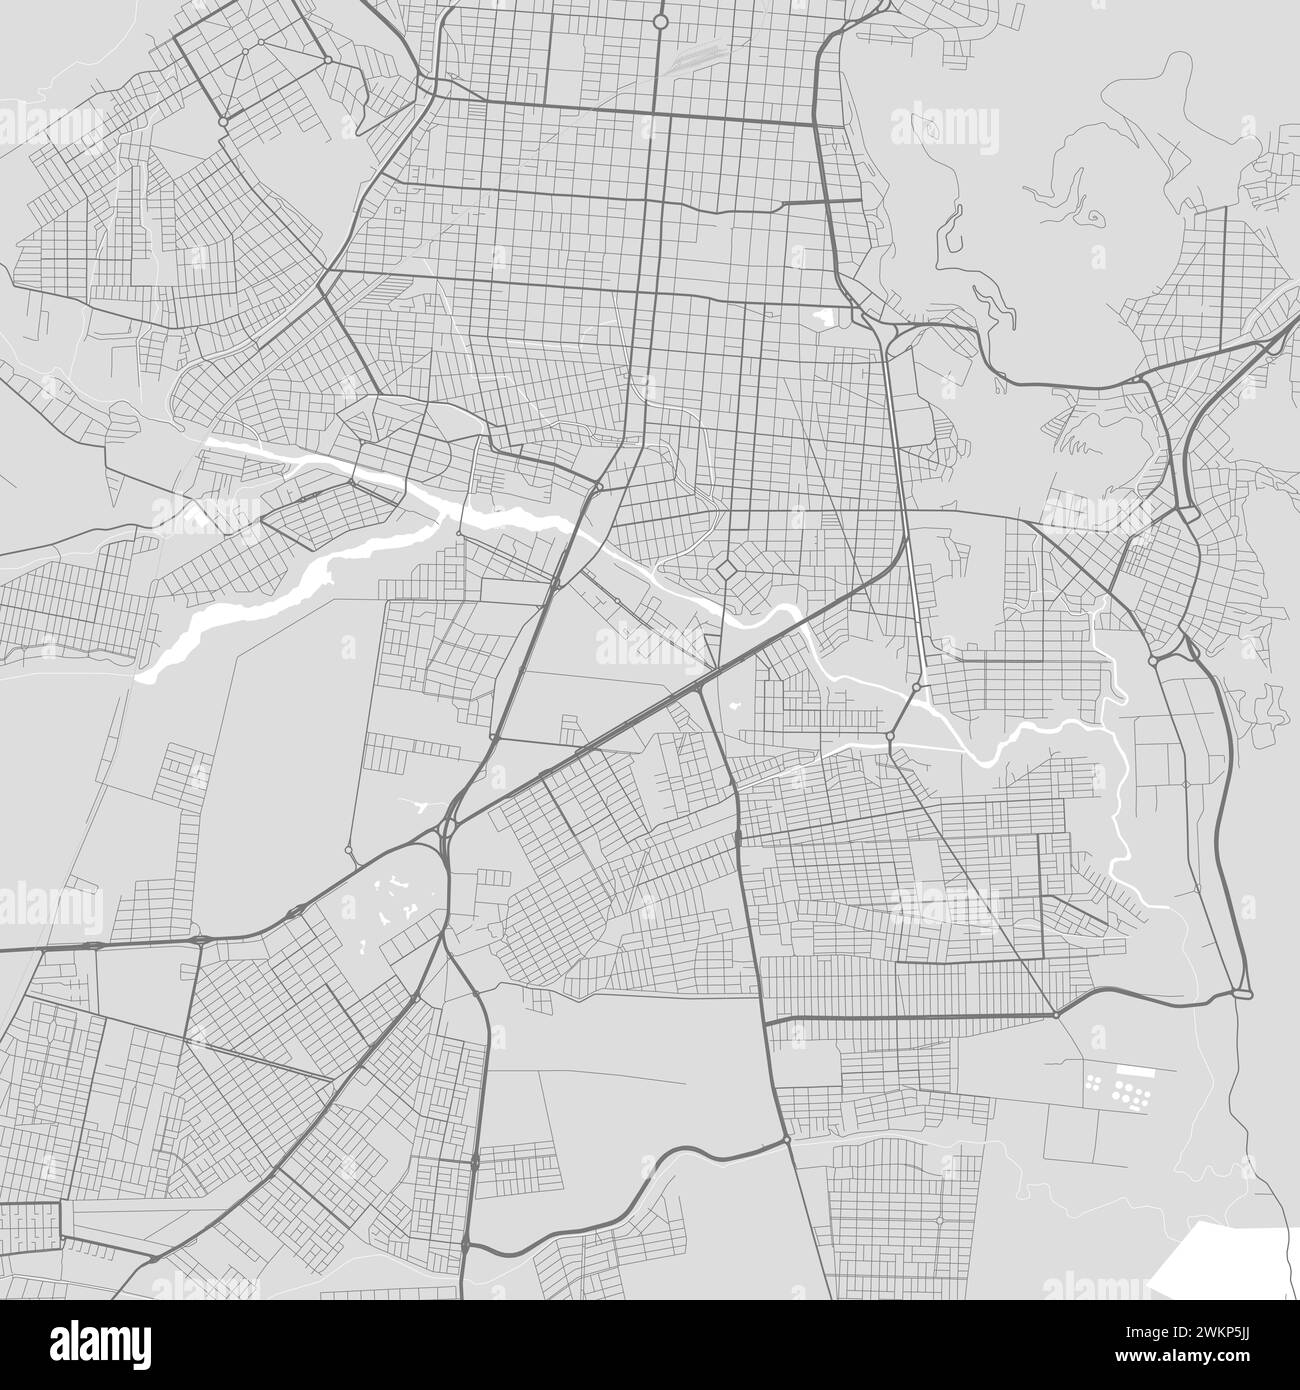 Map of Salta city, Argentina. Urban black and white poster. Road map image with metropolitan city area view. Stock Vector